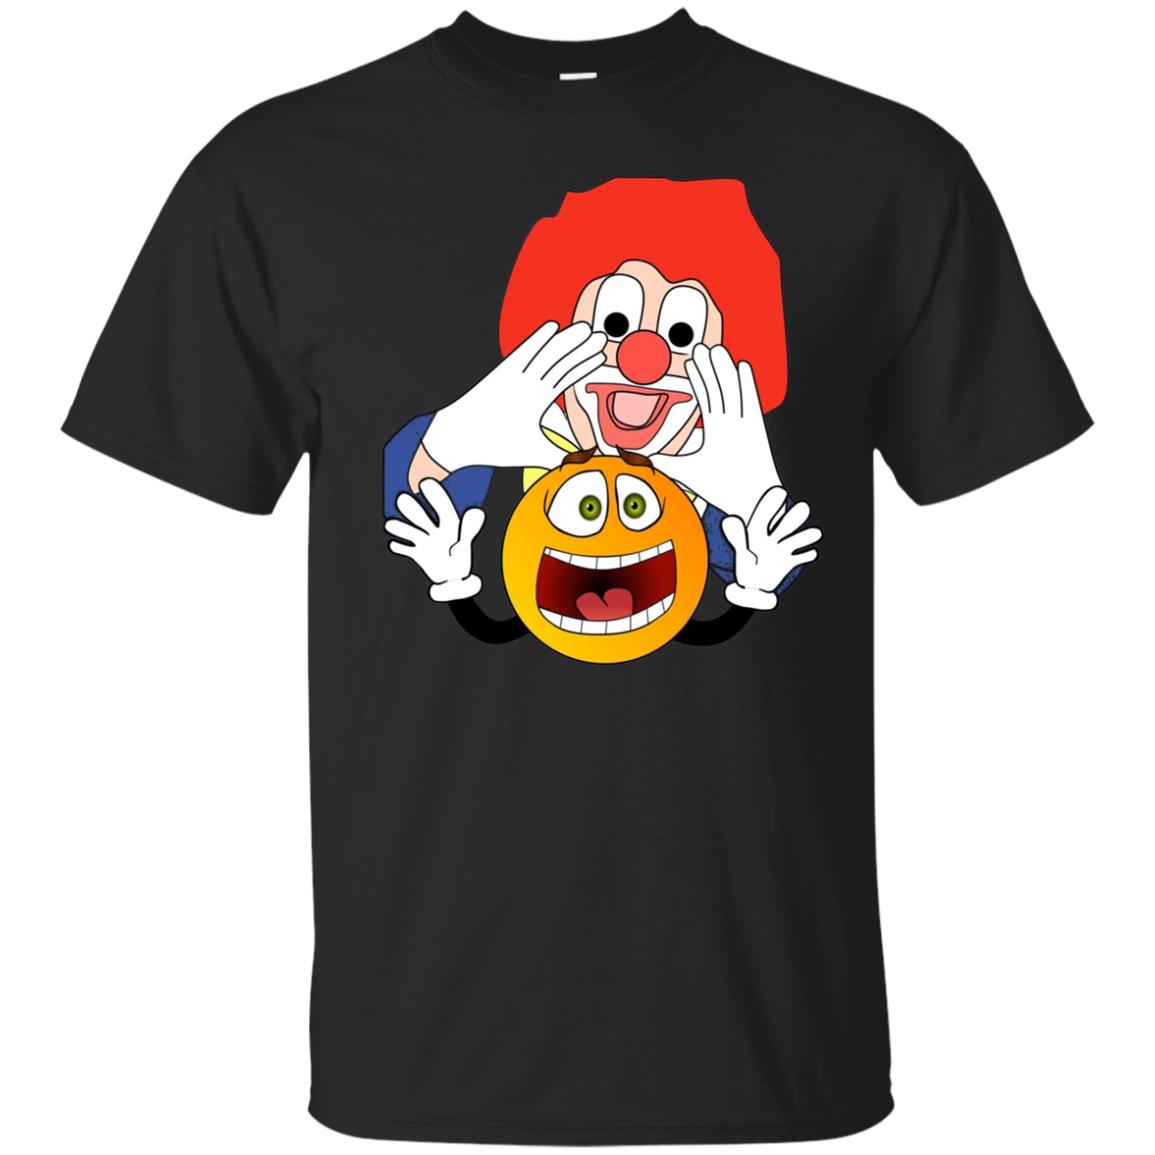 Emoticon Flees A Scary Halloween Clown In Horror, T-shirt